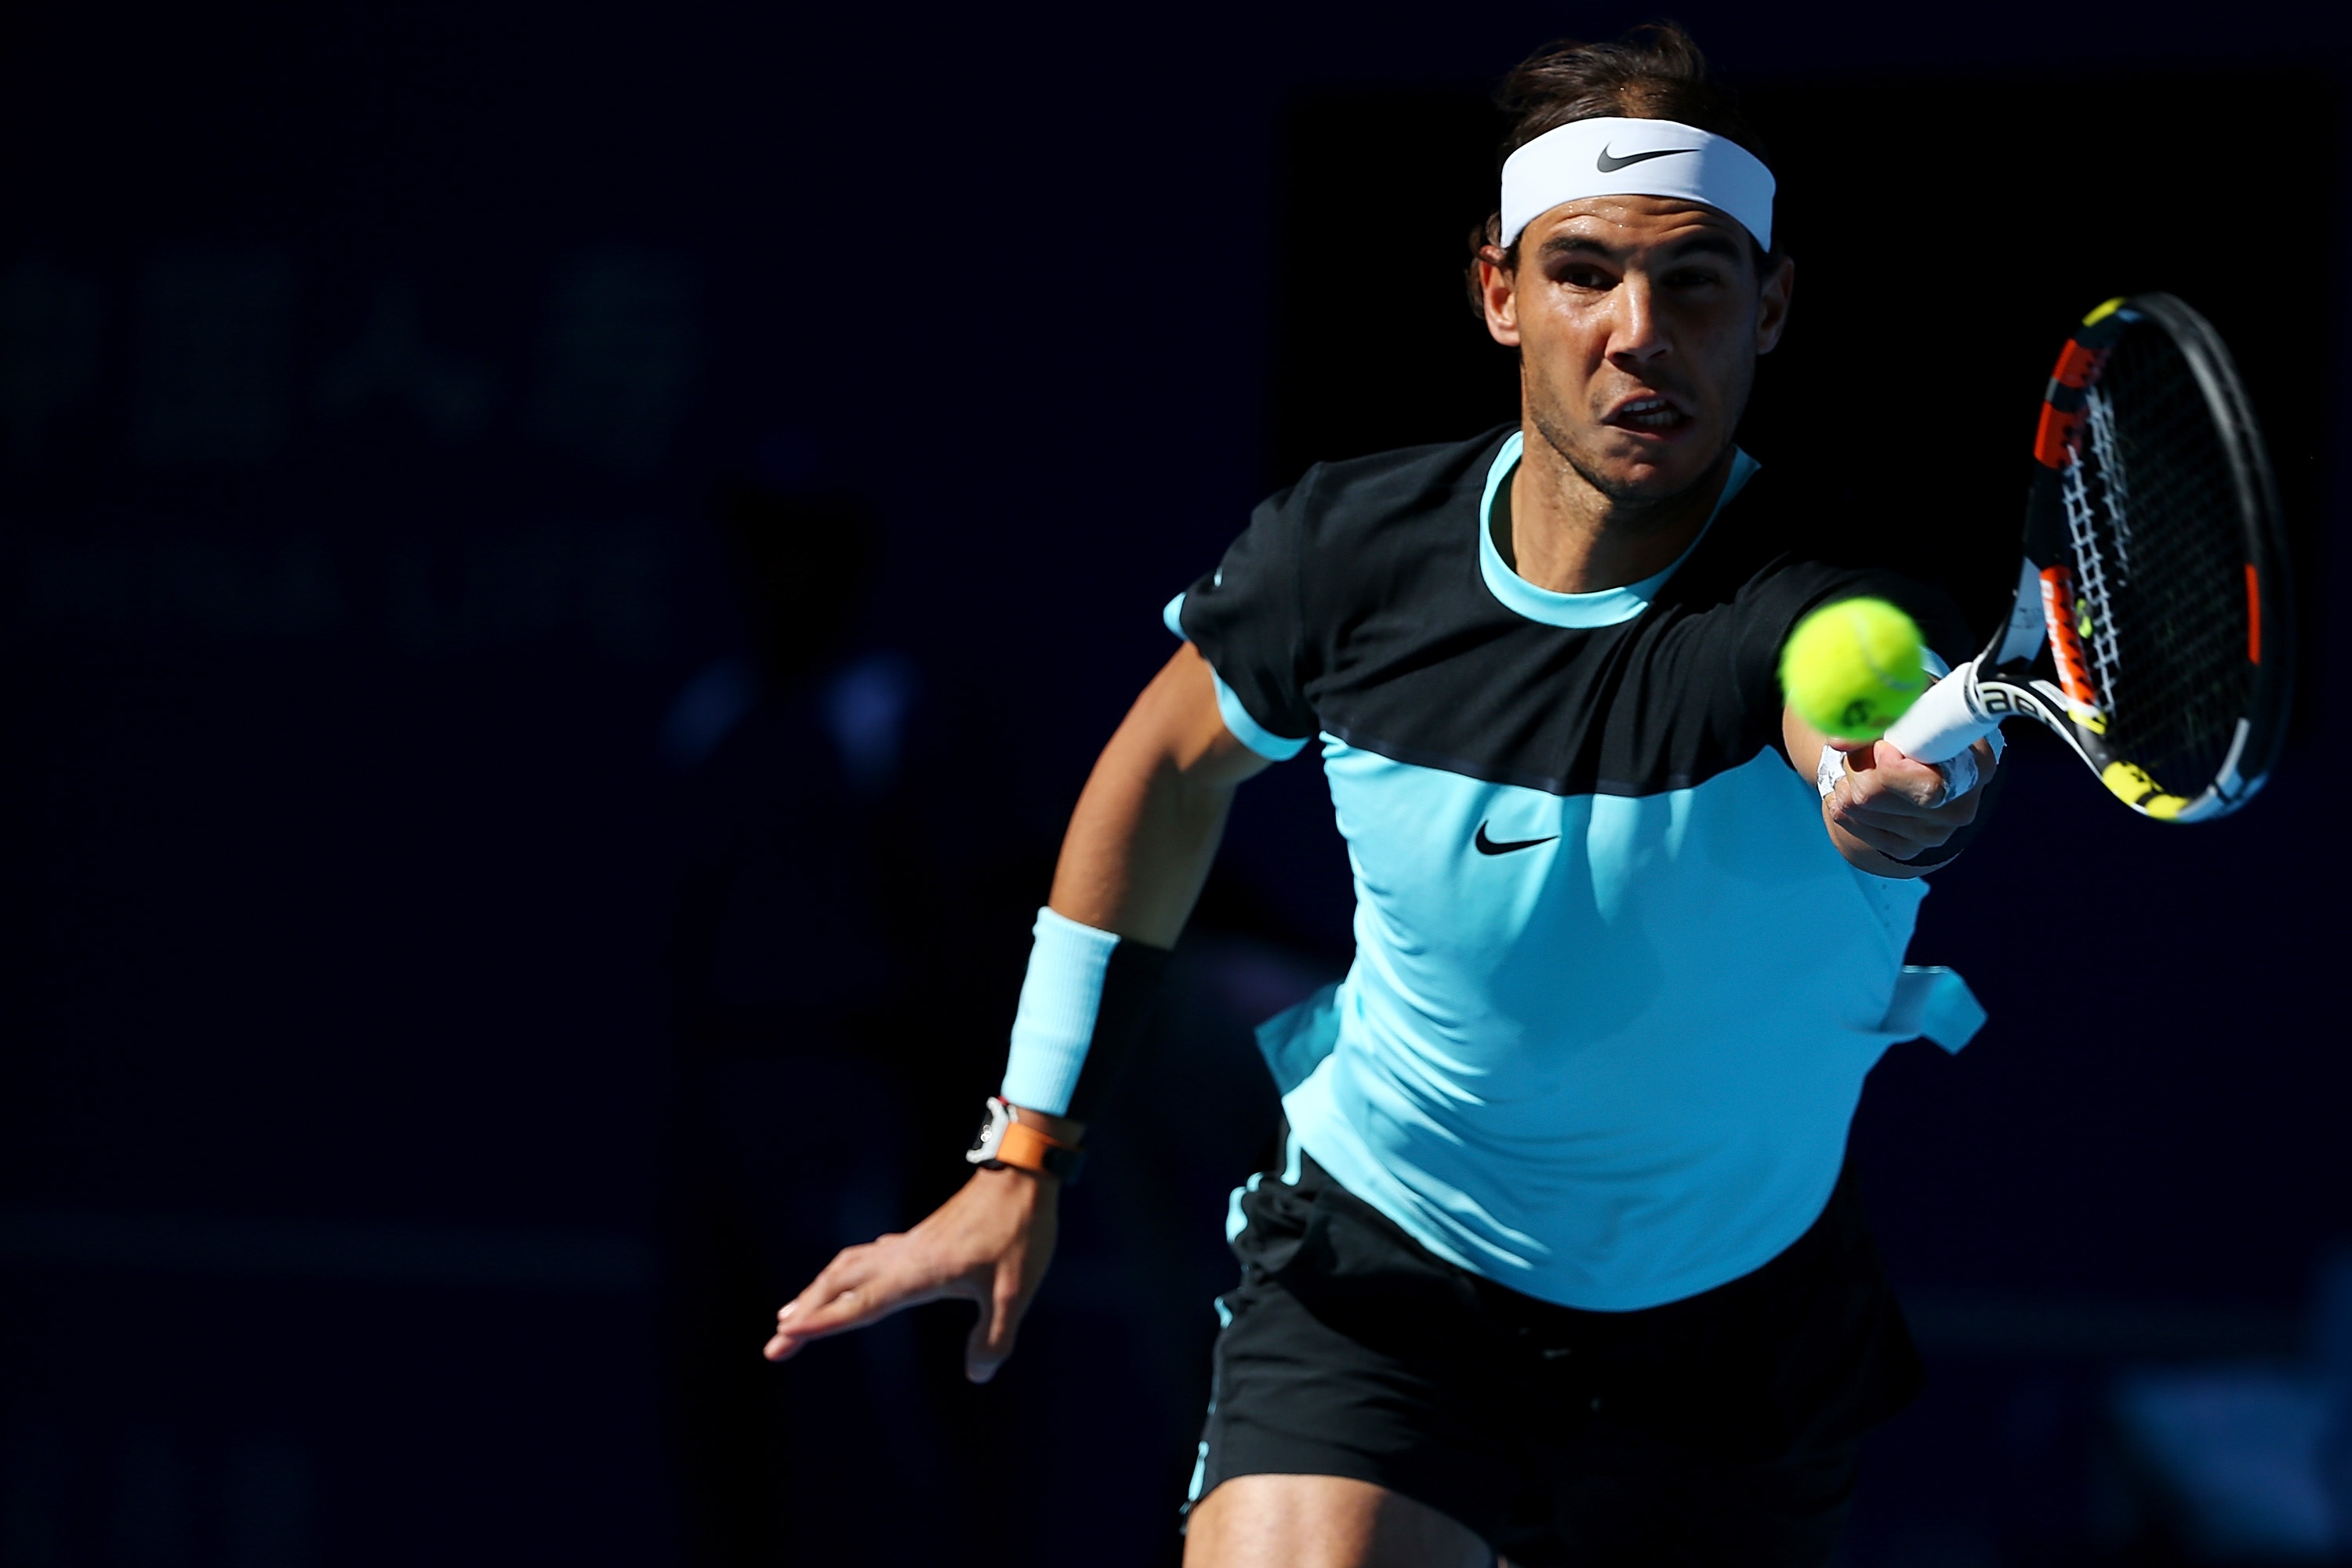 rafael-nadal-in-action-against-jack-sock-at-the-china-open-1-0631